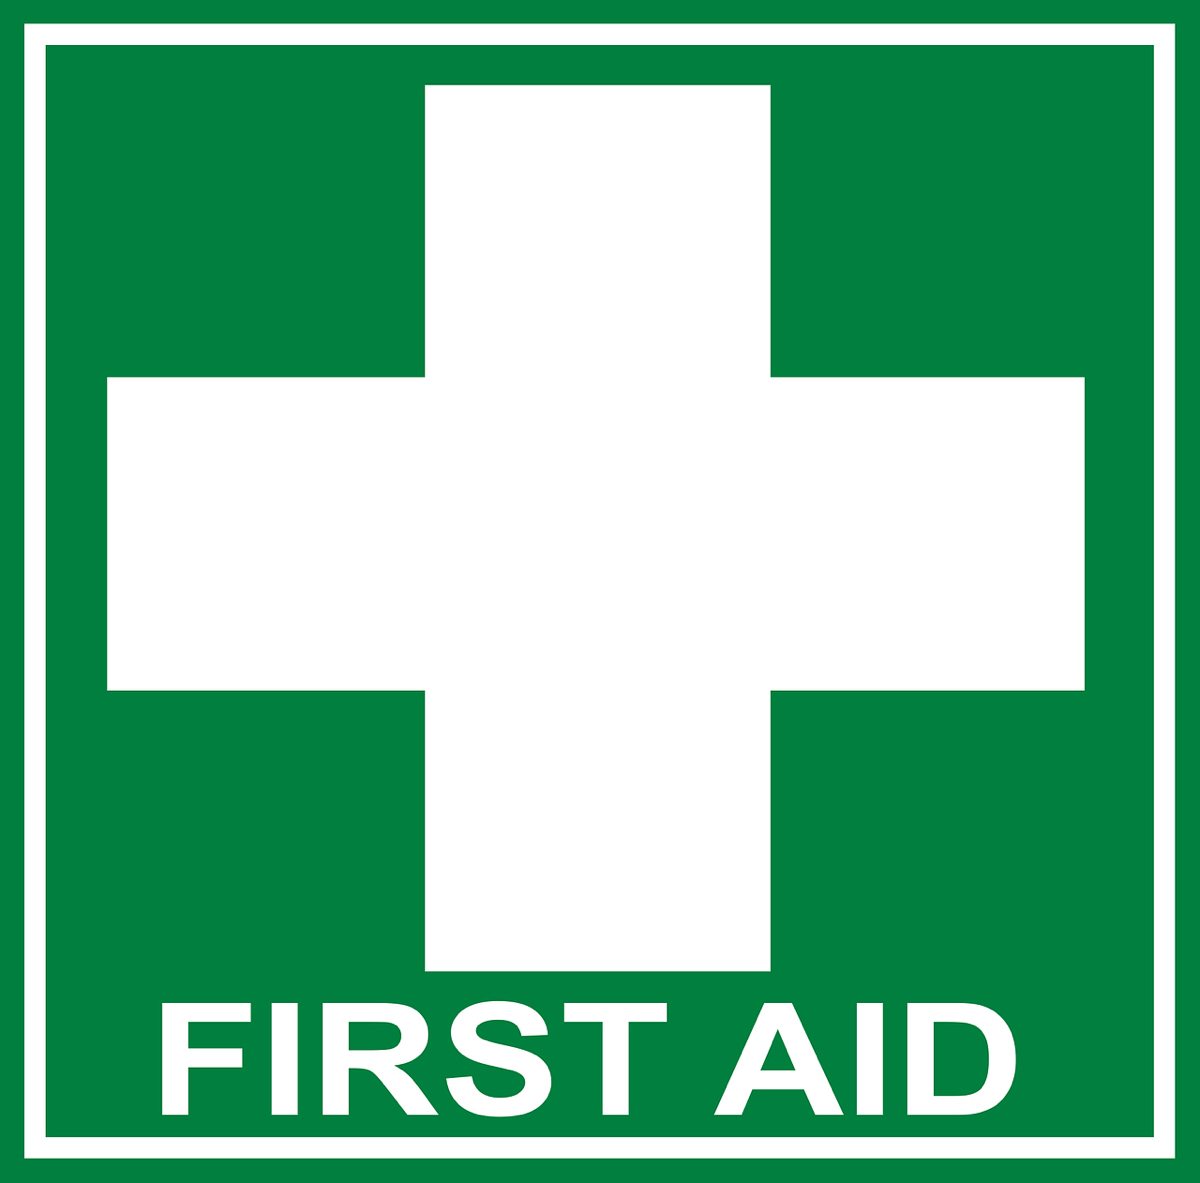 First Aid Facilities - ANNUAL RISK ASSESSMENT